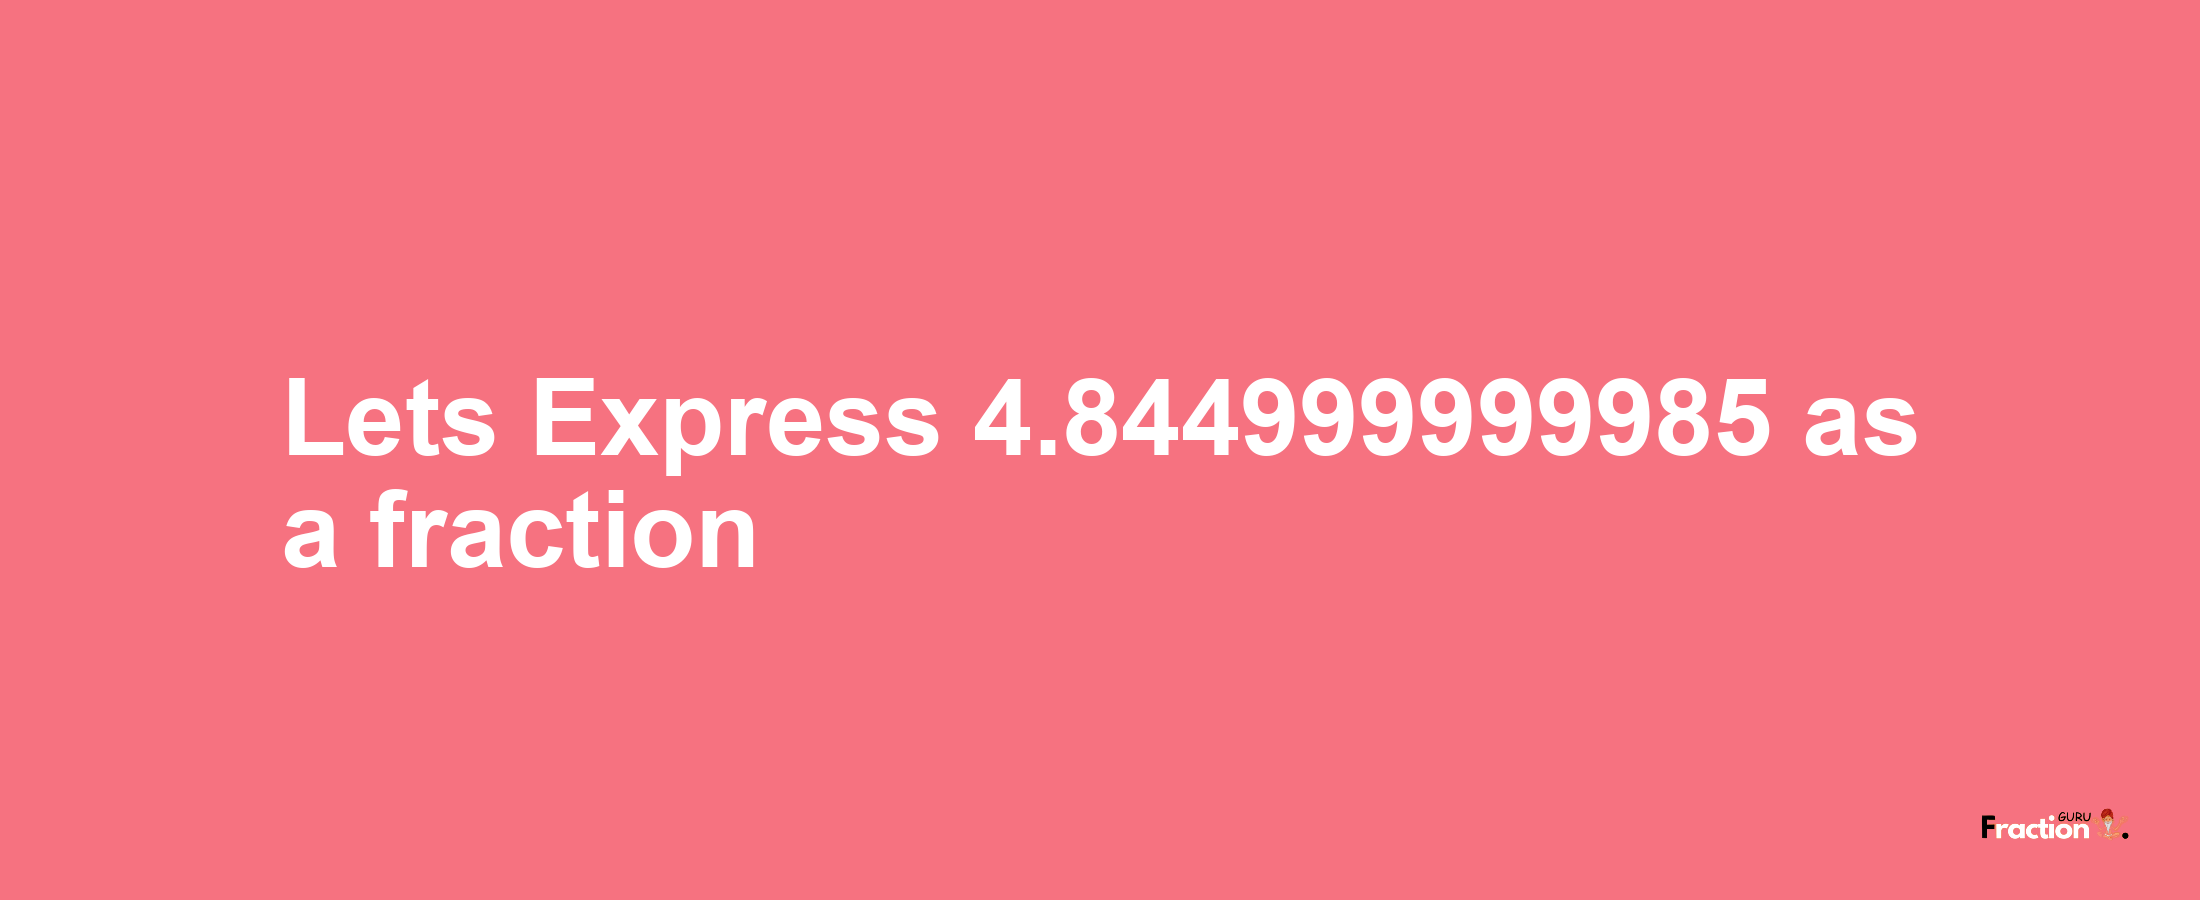 Lets Express 4.844999999985 as afraction